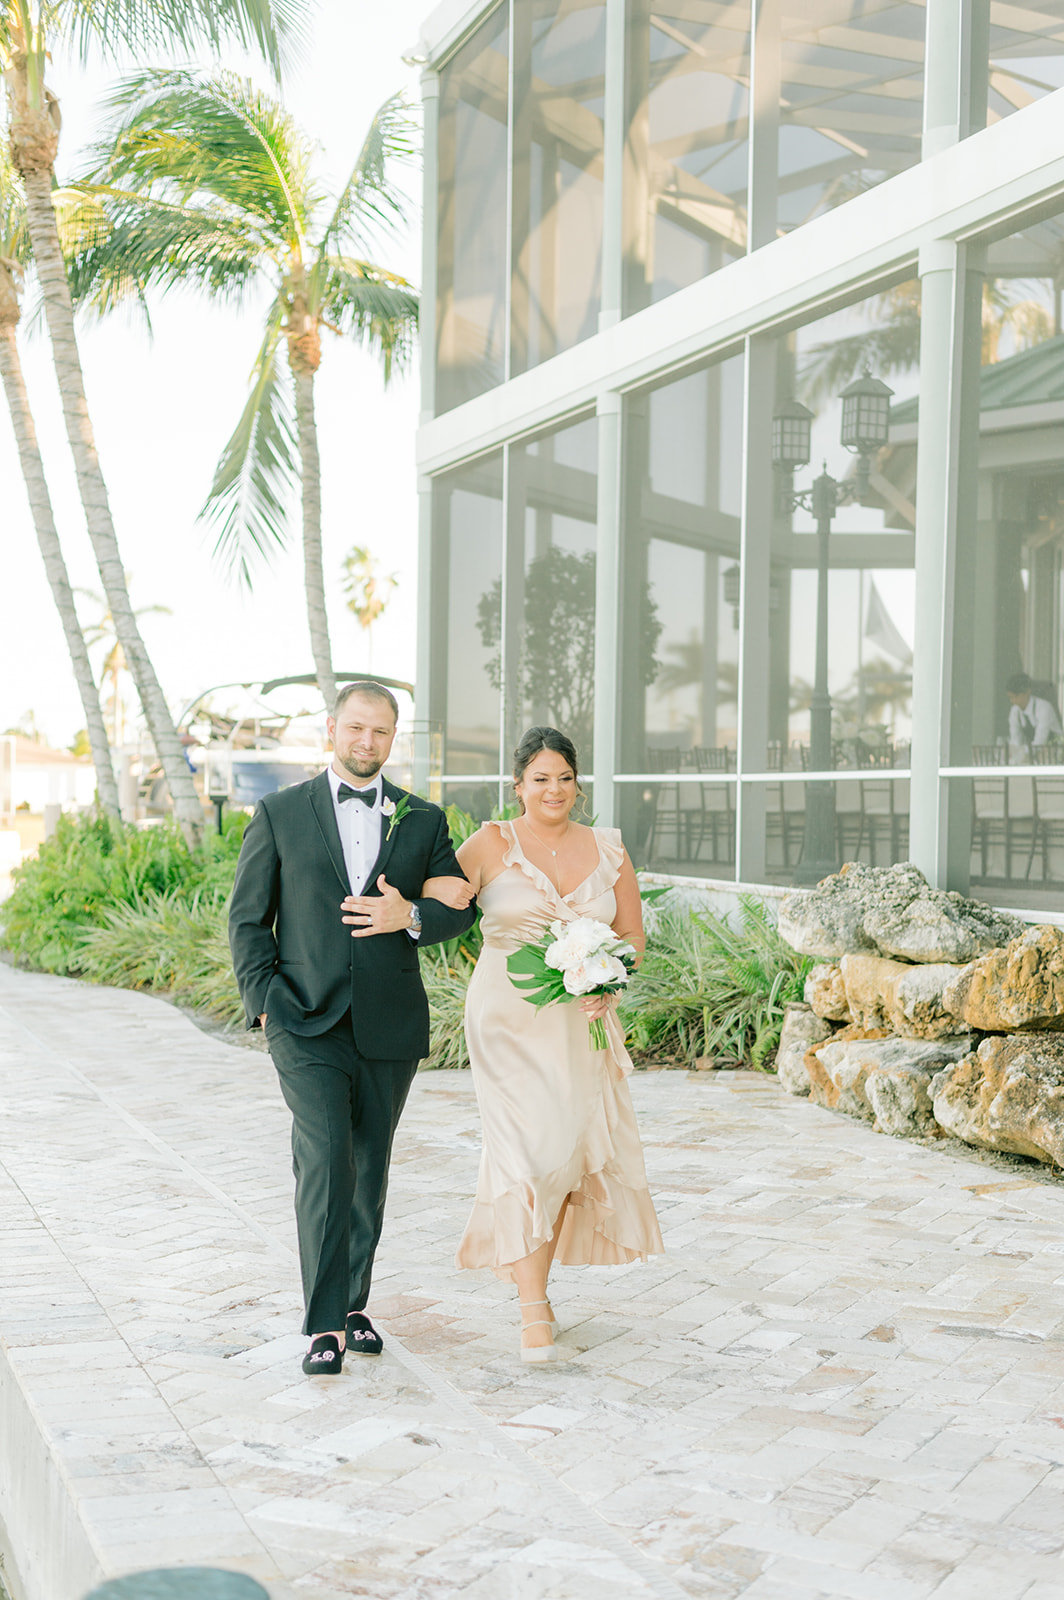 Naples Florida Photographer with a Passion for Weddings - Your Day in Images
